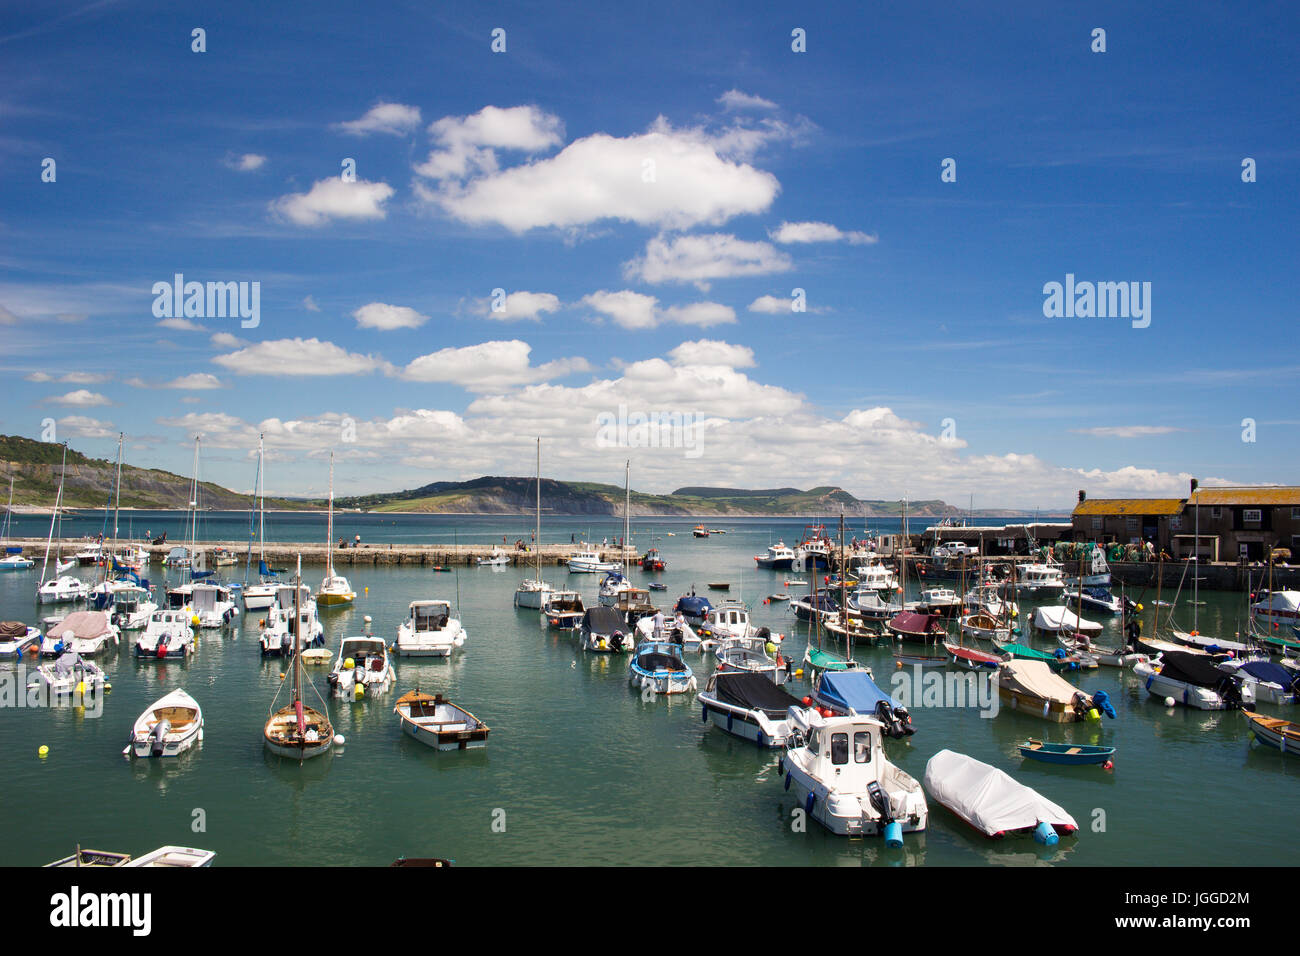 Harbour at Lyme Regis with many boats of different types with views towards Charmouth of the Dorset coast. Stock Photo